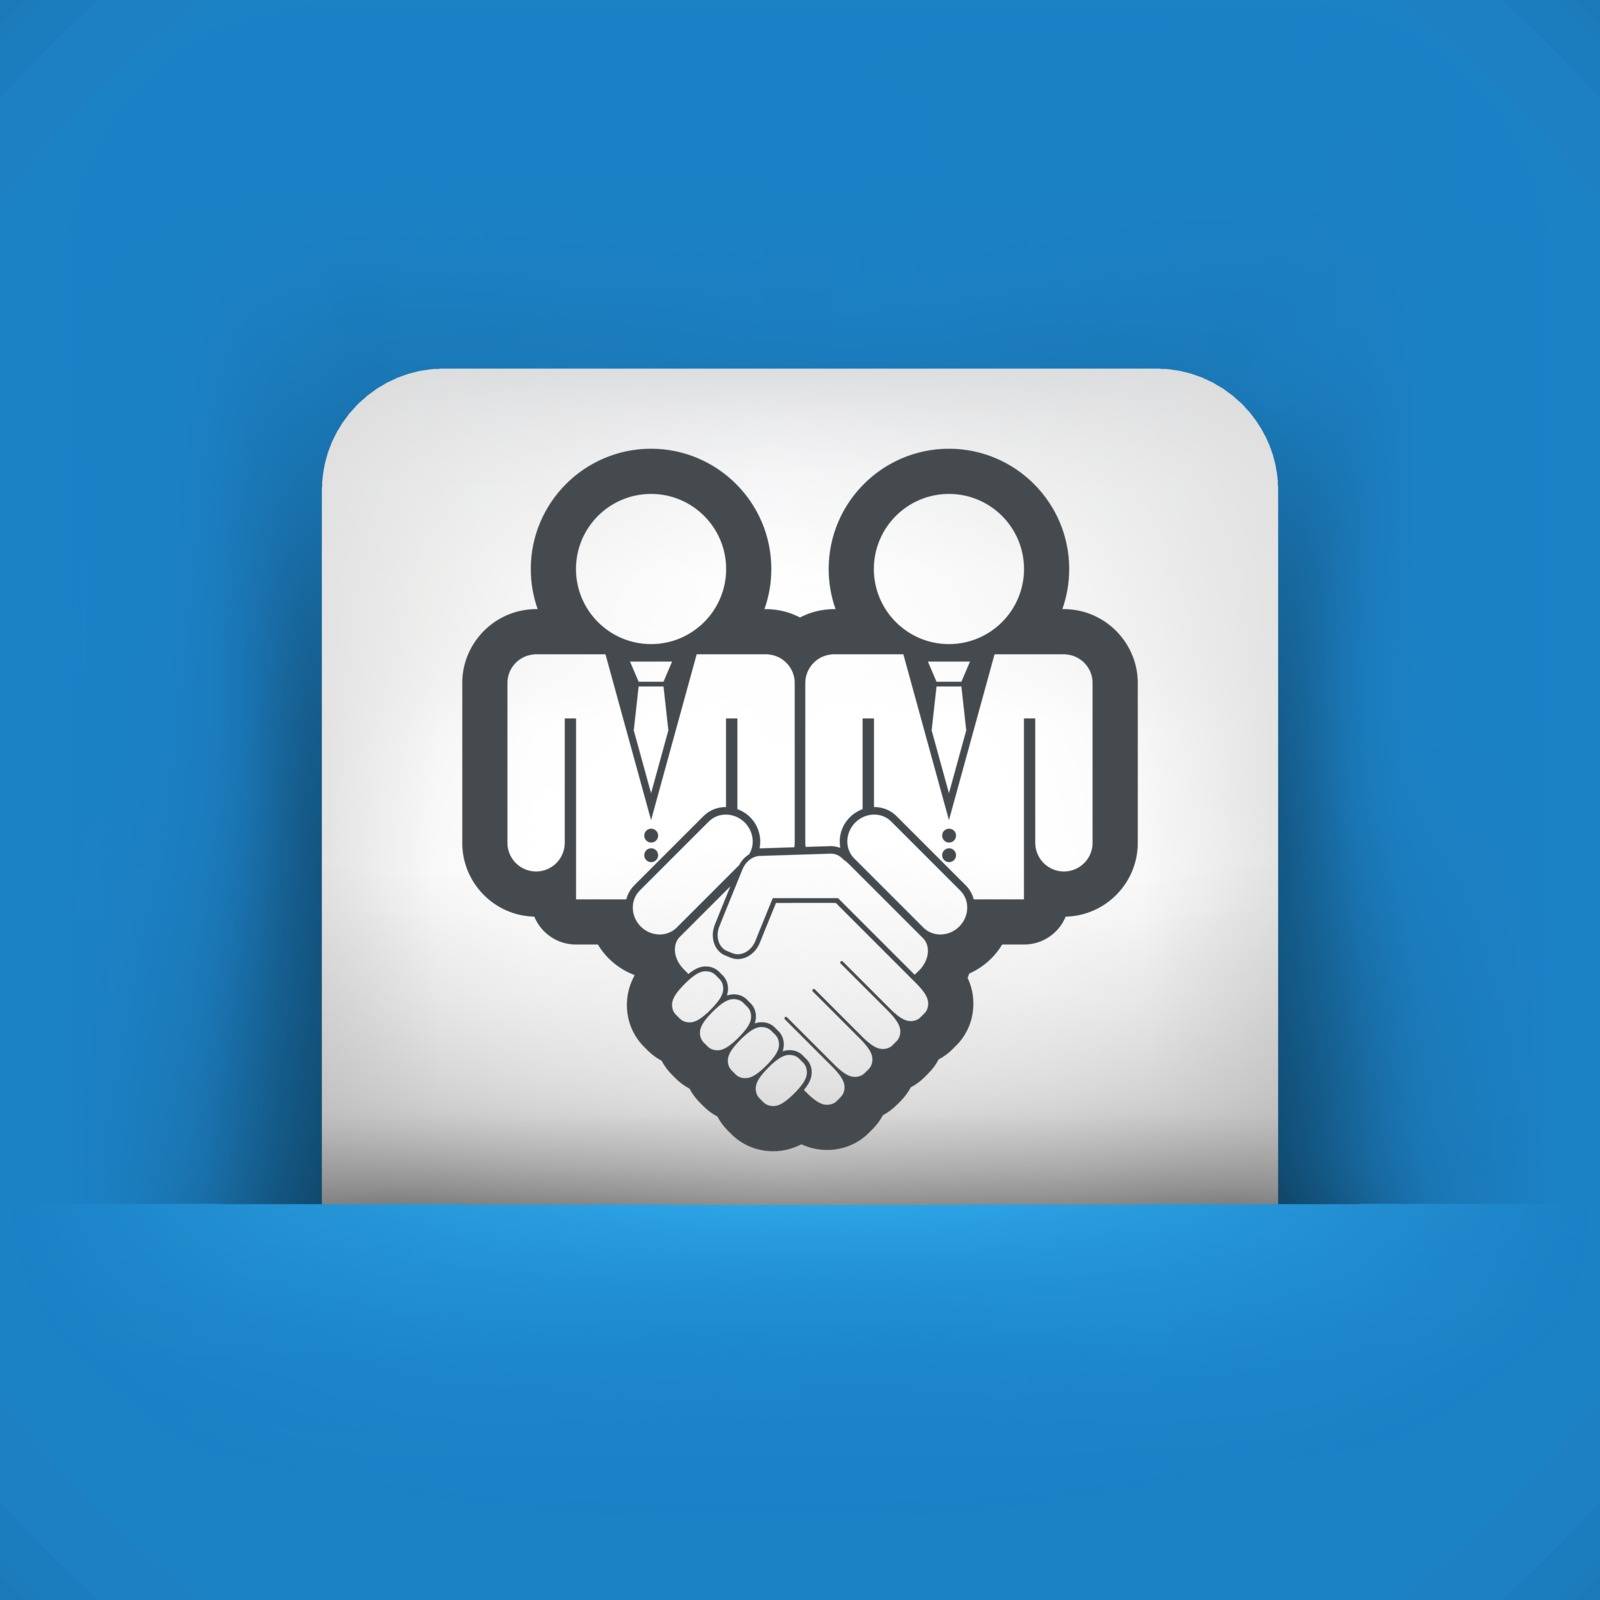 Corporate agreement icon by myVector